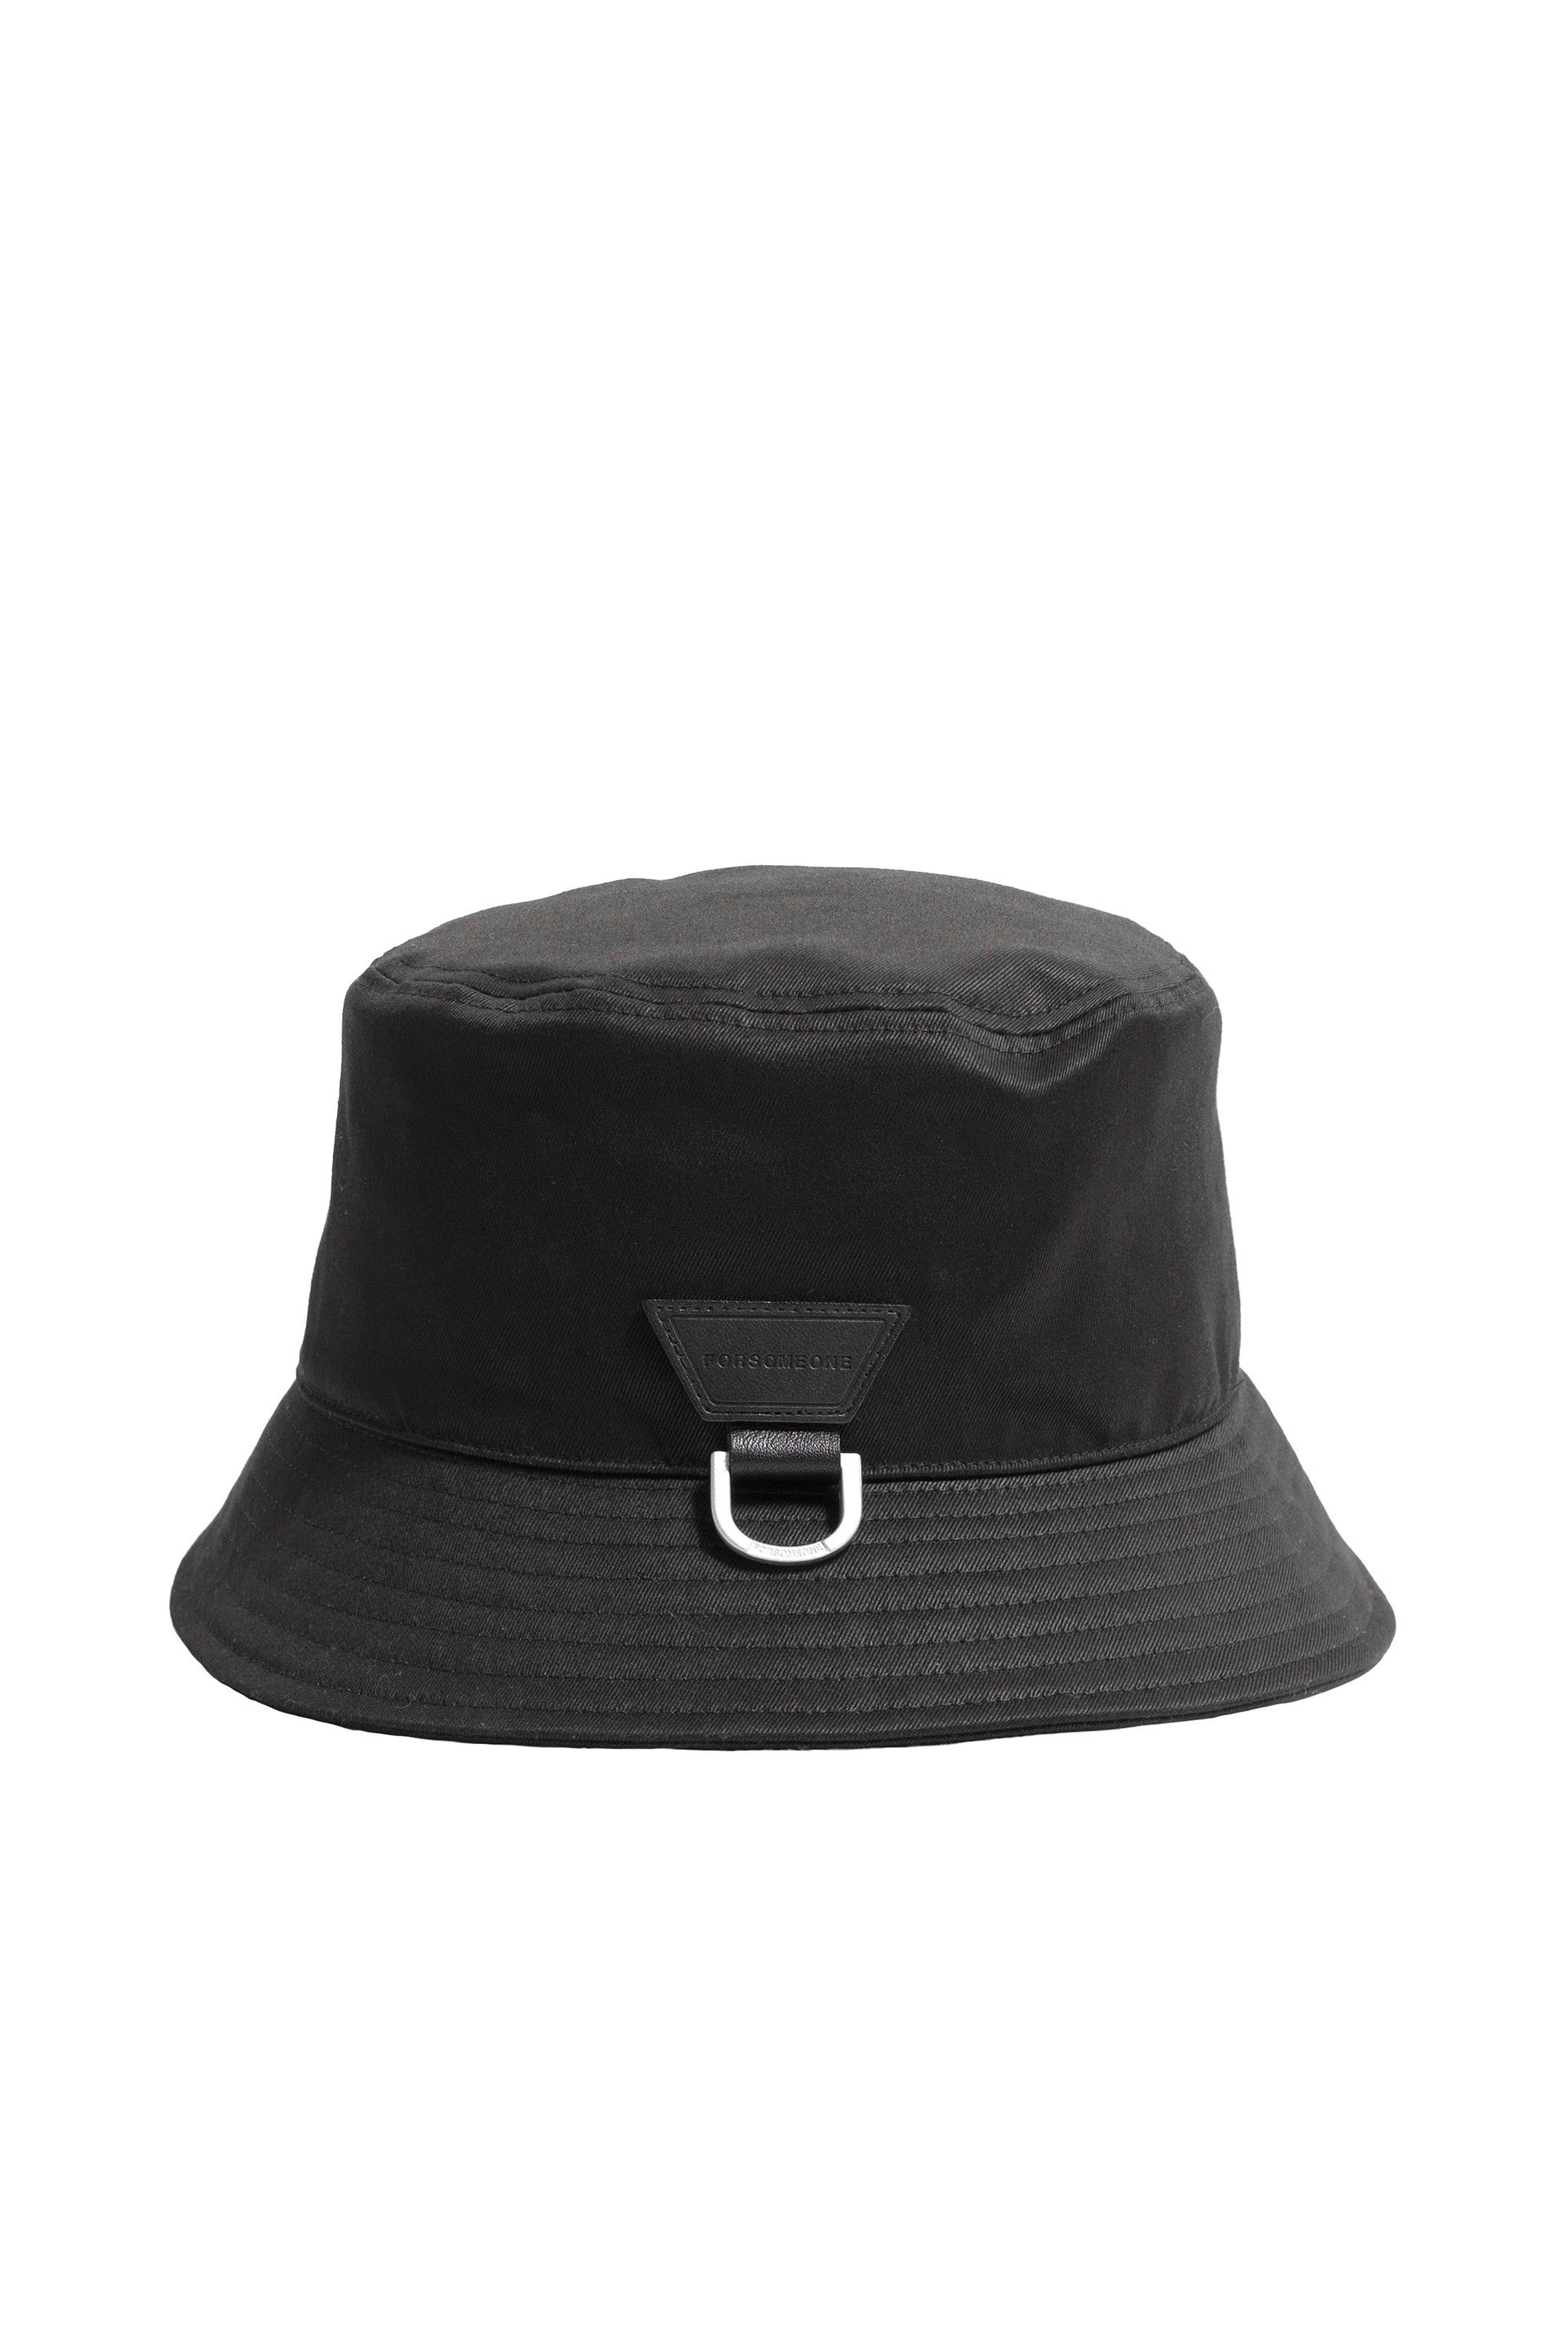 FORSOMEONE SS23 BUCKET HAT (EXCLUSIVE) / BLK -NUBIAN